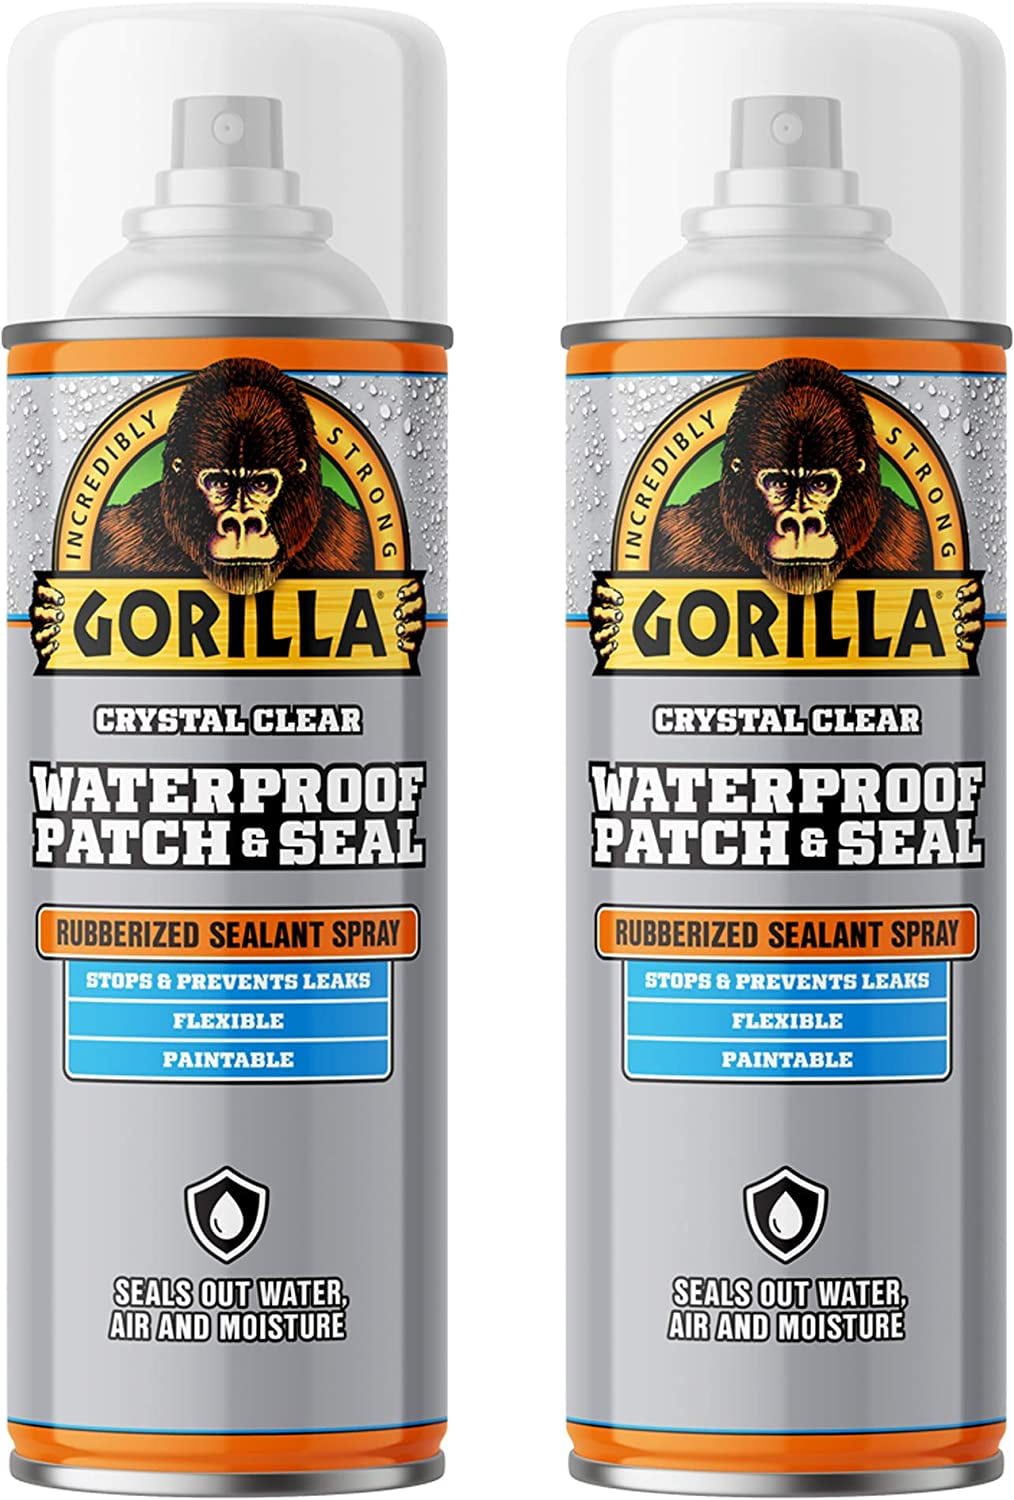 Gorilla Glue White Waterproof Patch and Seal Repair and Sealant Tape, 10  Foot Roll 